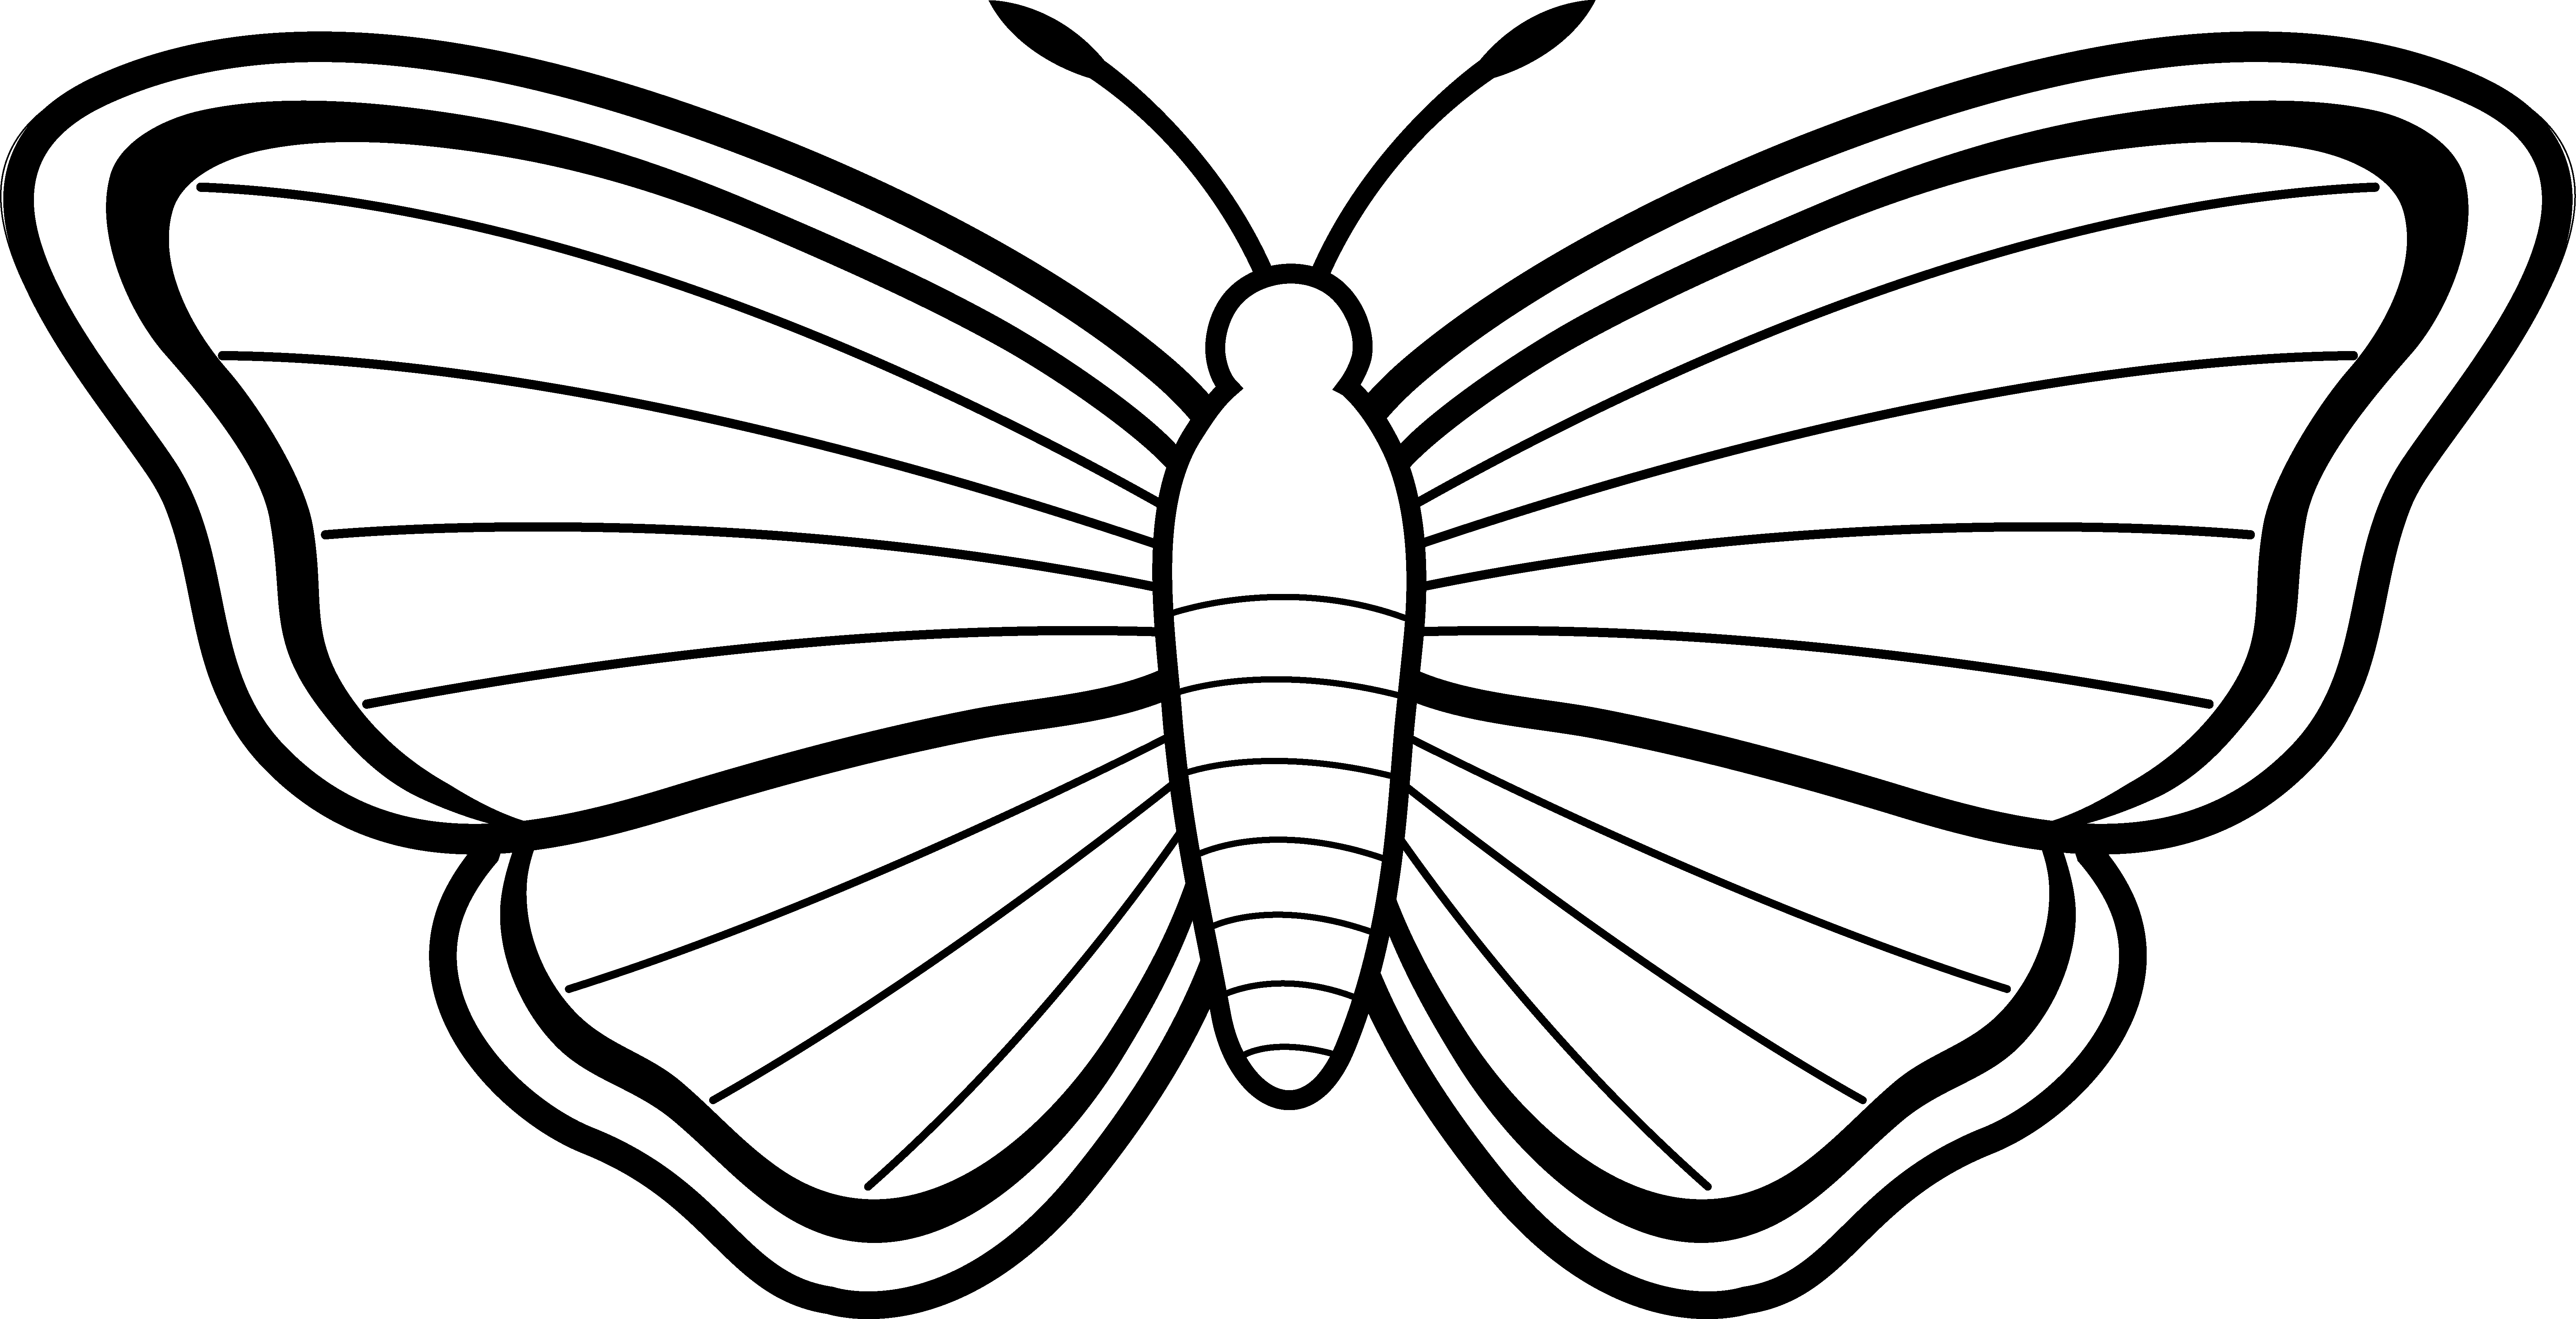 Outline Drawing Of Butterfly - ClipArt Best